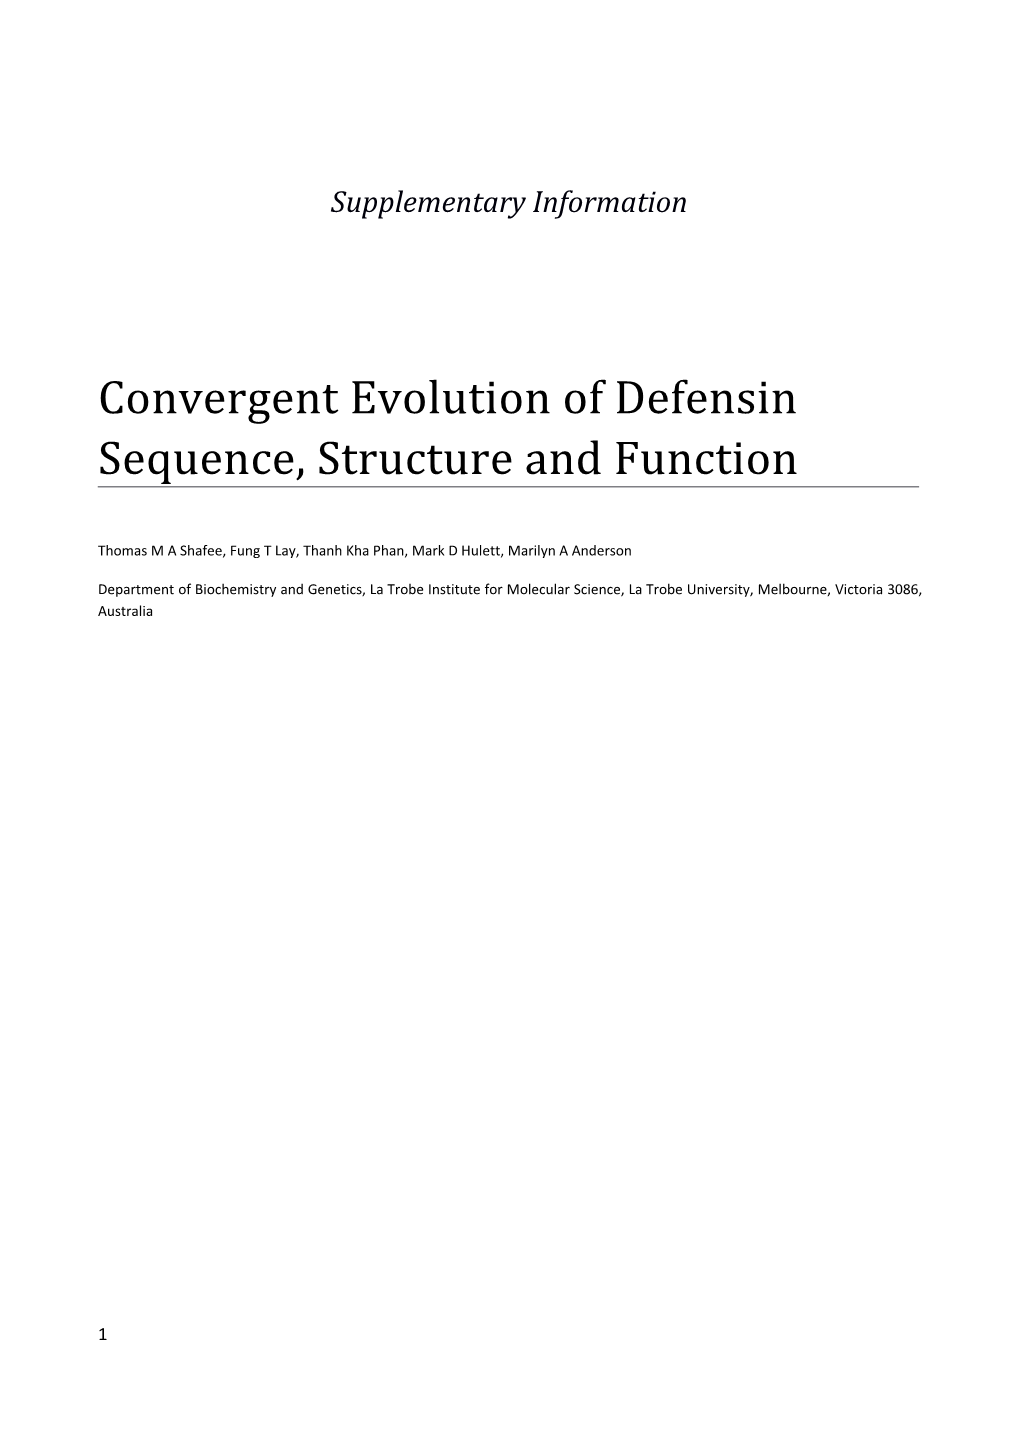 Convergent Evolution of Defensin Sequence, Structure and Function